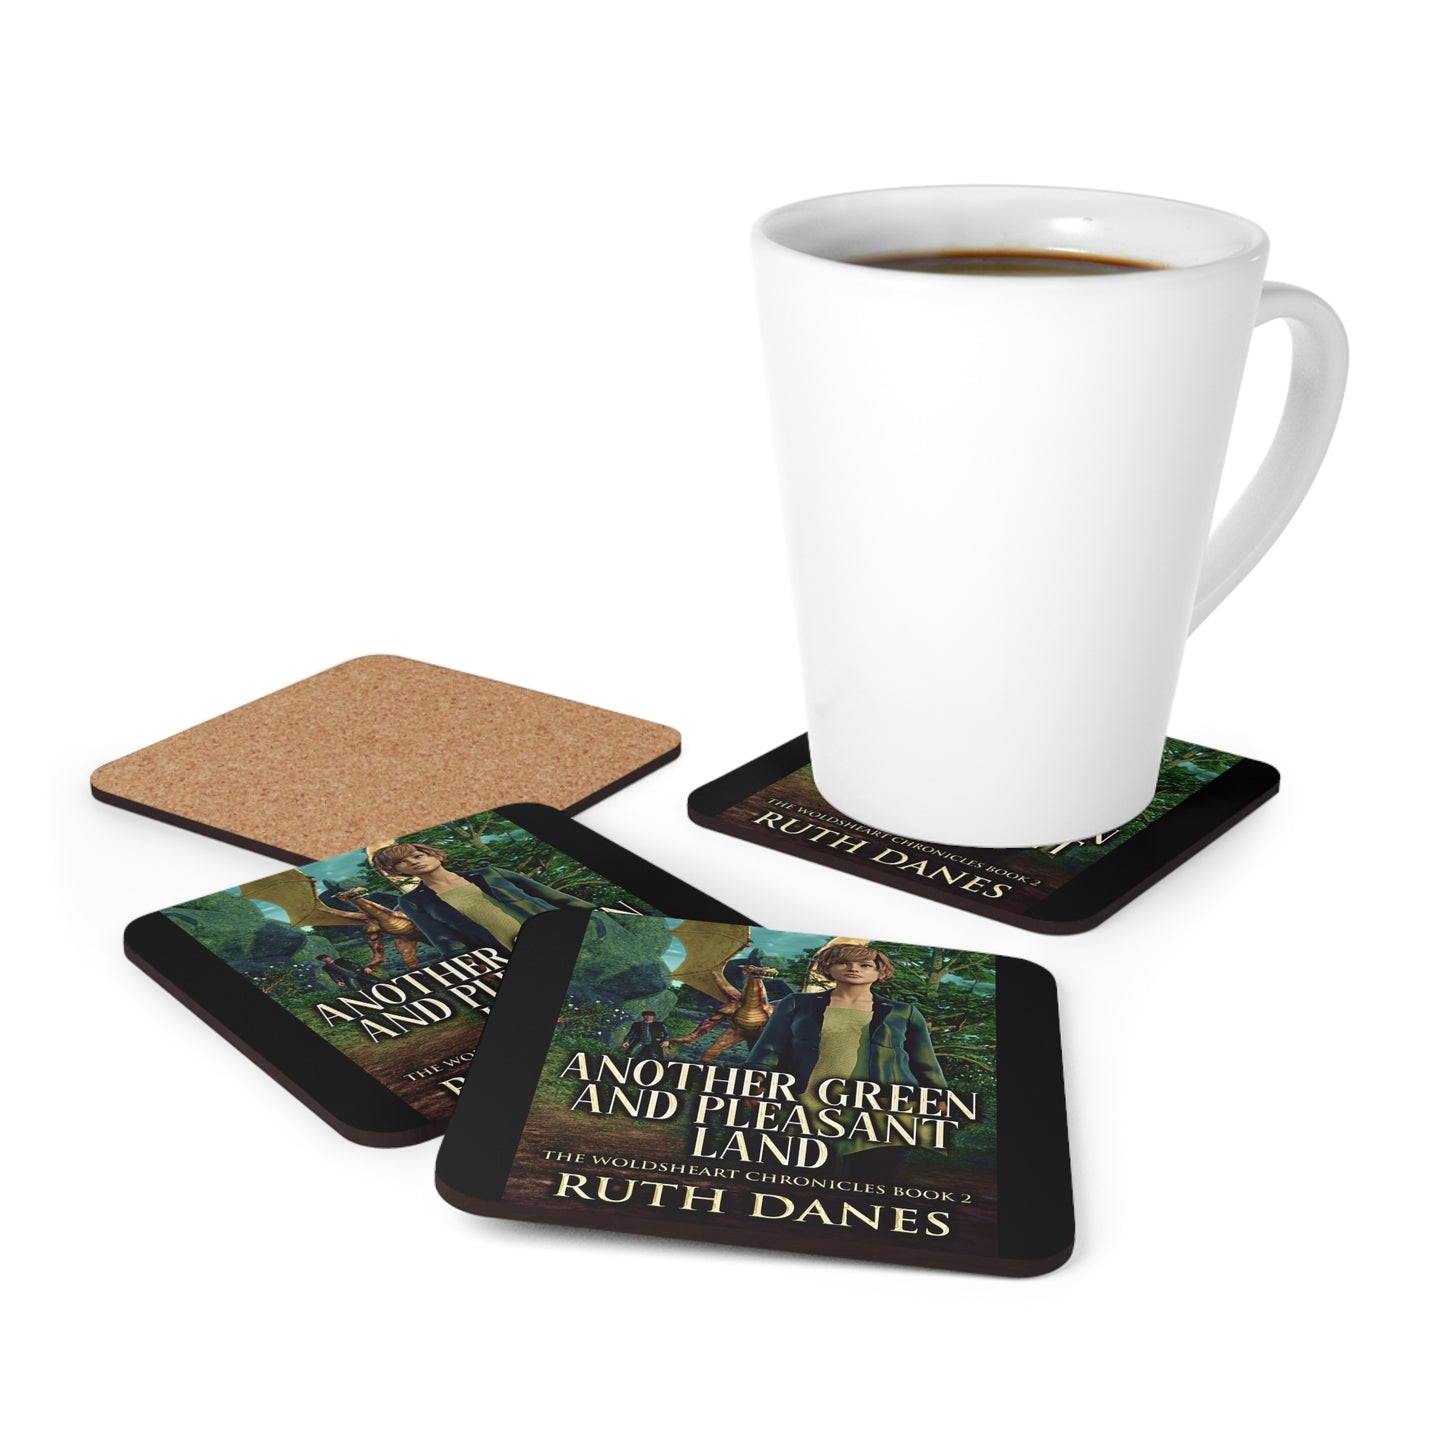 Another Green and Pleasant Land - Corkwood Coaster Set